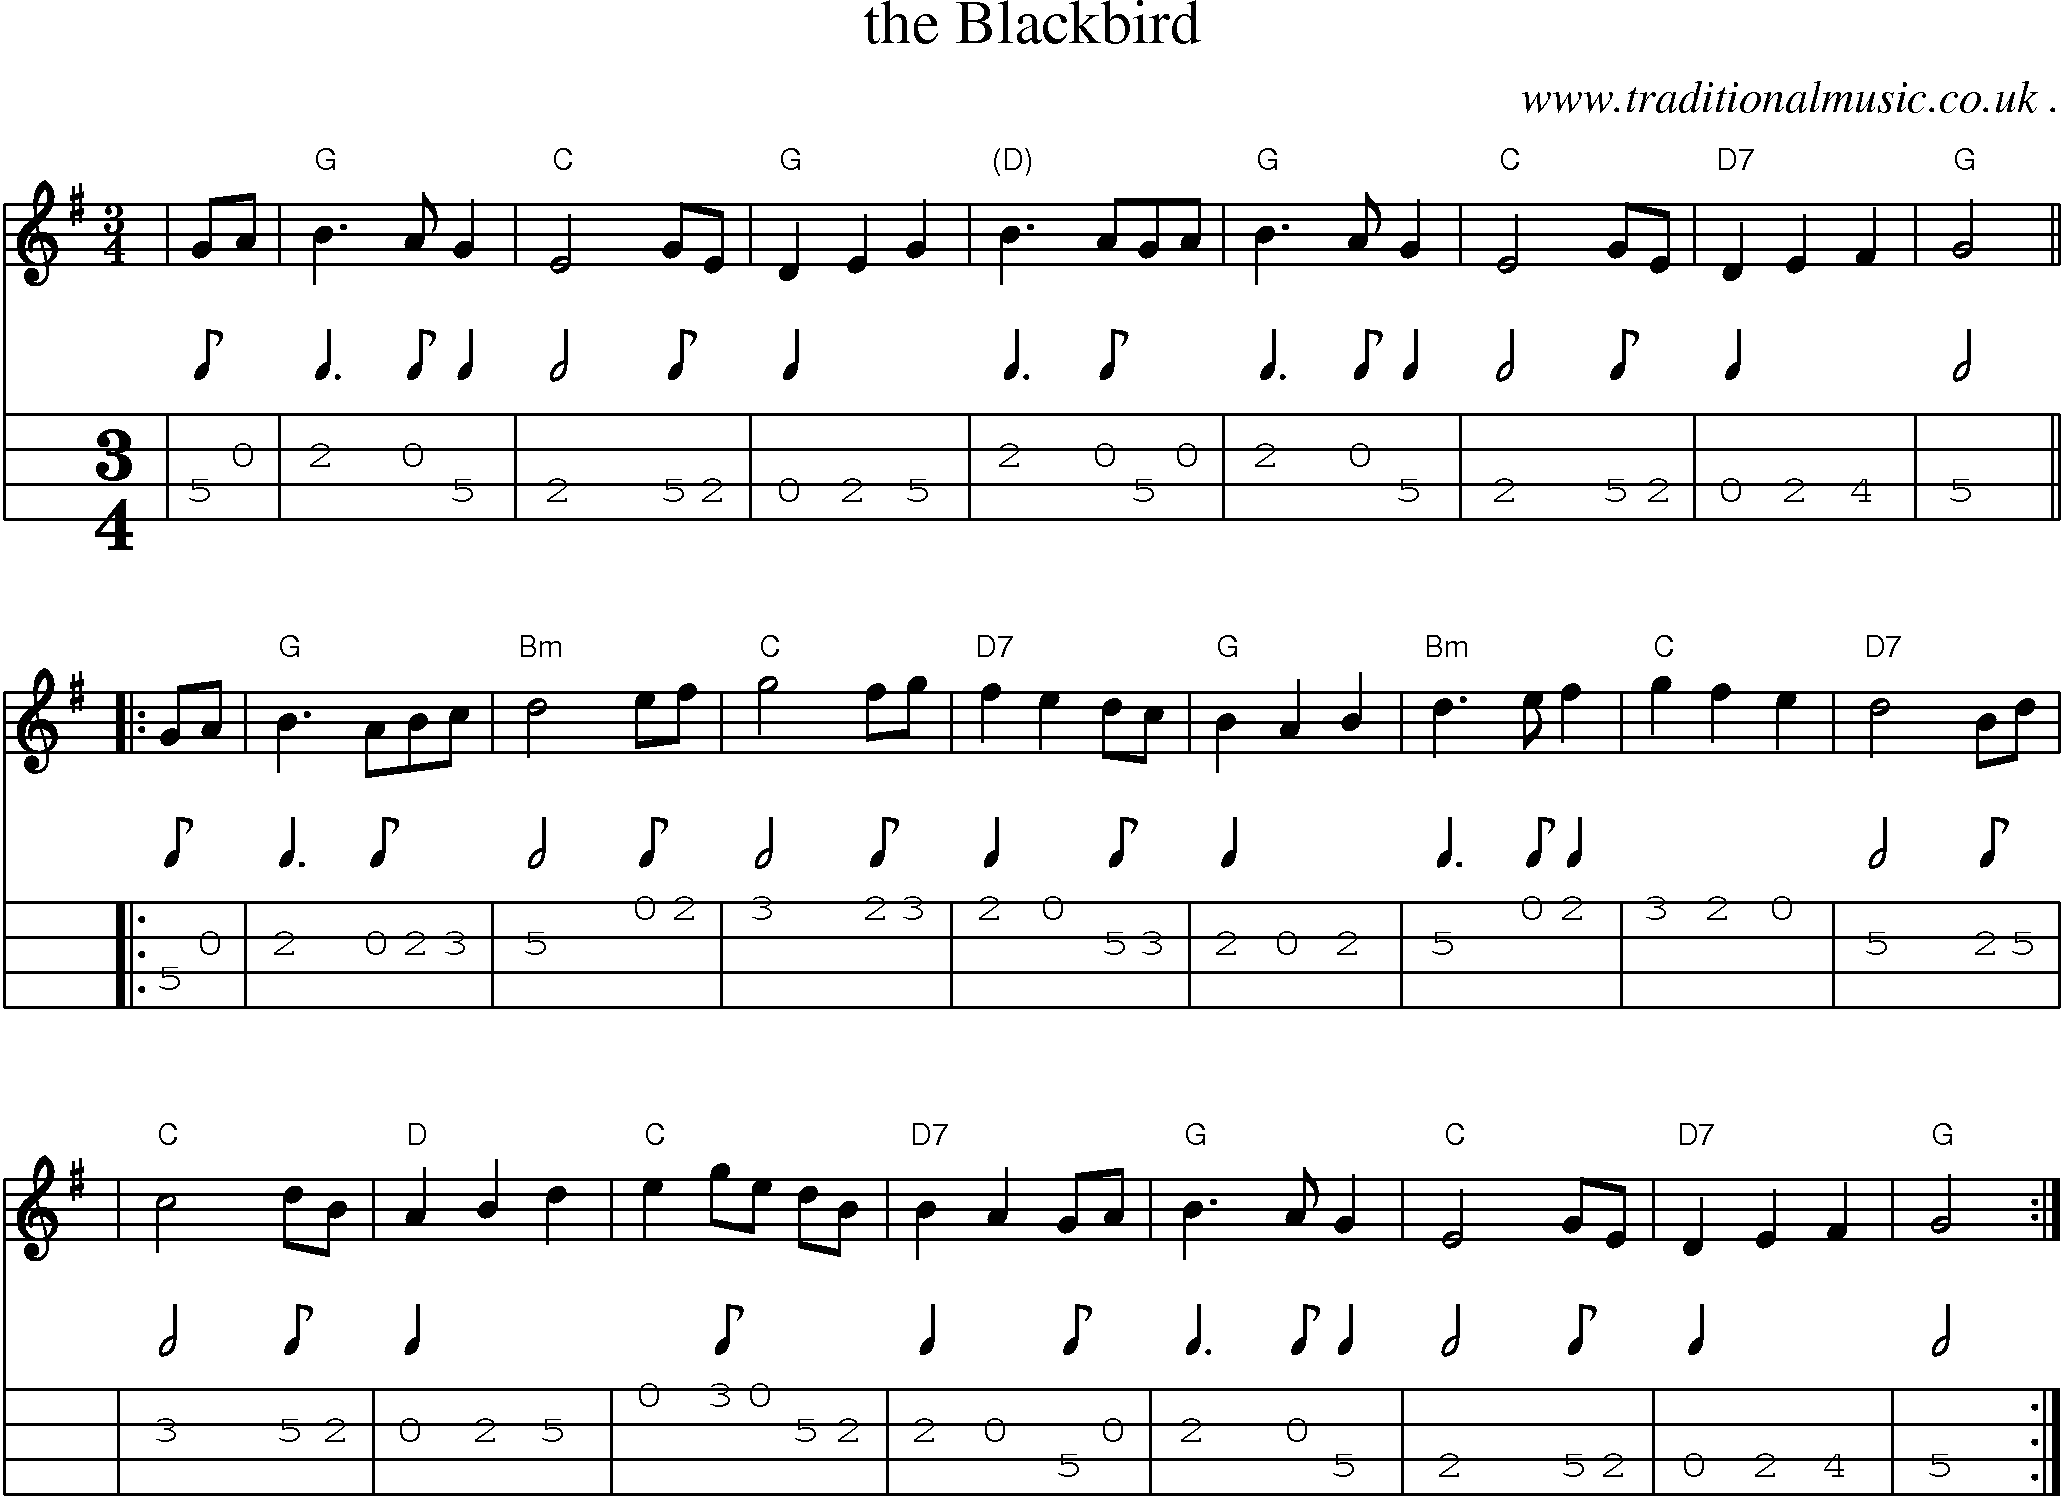 Sheet-music  score, Chords and Mandolin Tabs for The Blackbird